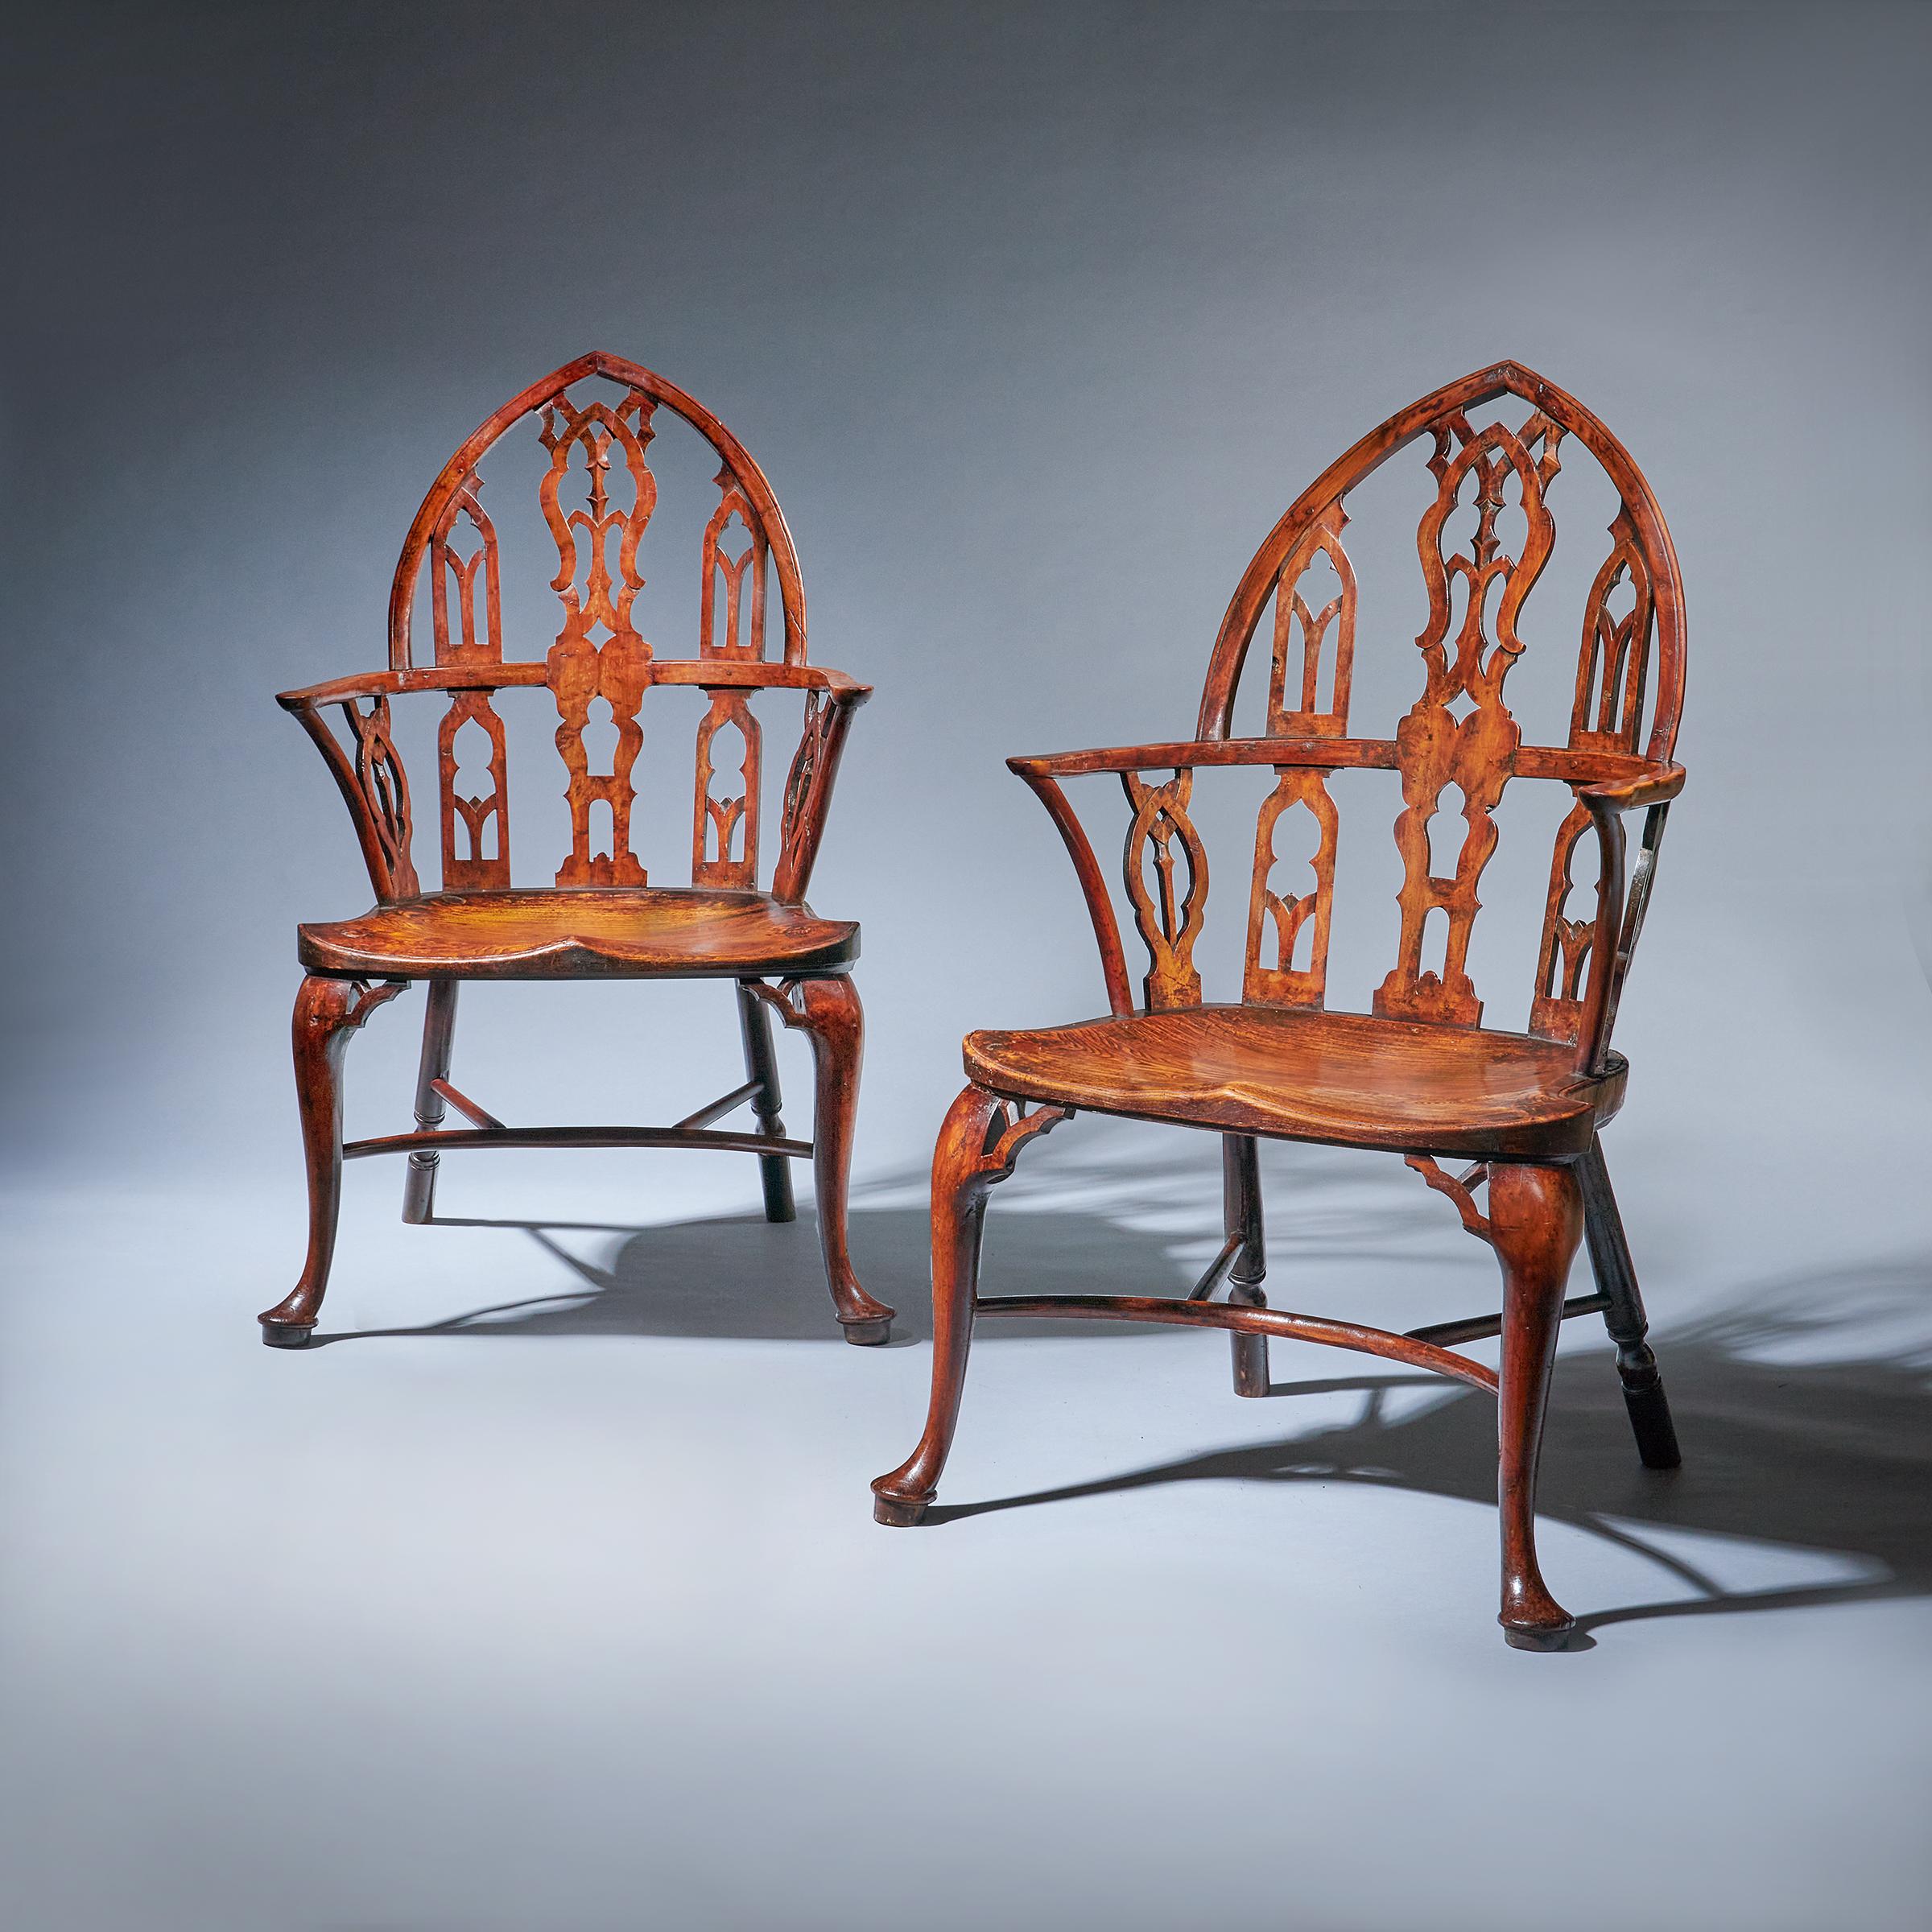 The Windsor chair at its most elaborate and fine, the Gothic Windsor of yew wood and elm, circa 1760. England. It is, without doubt, the most sophisticated and elegant of all Windsor chairs and can be described as quintessentially English country